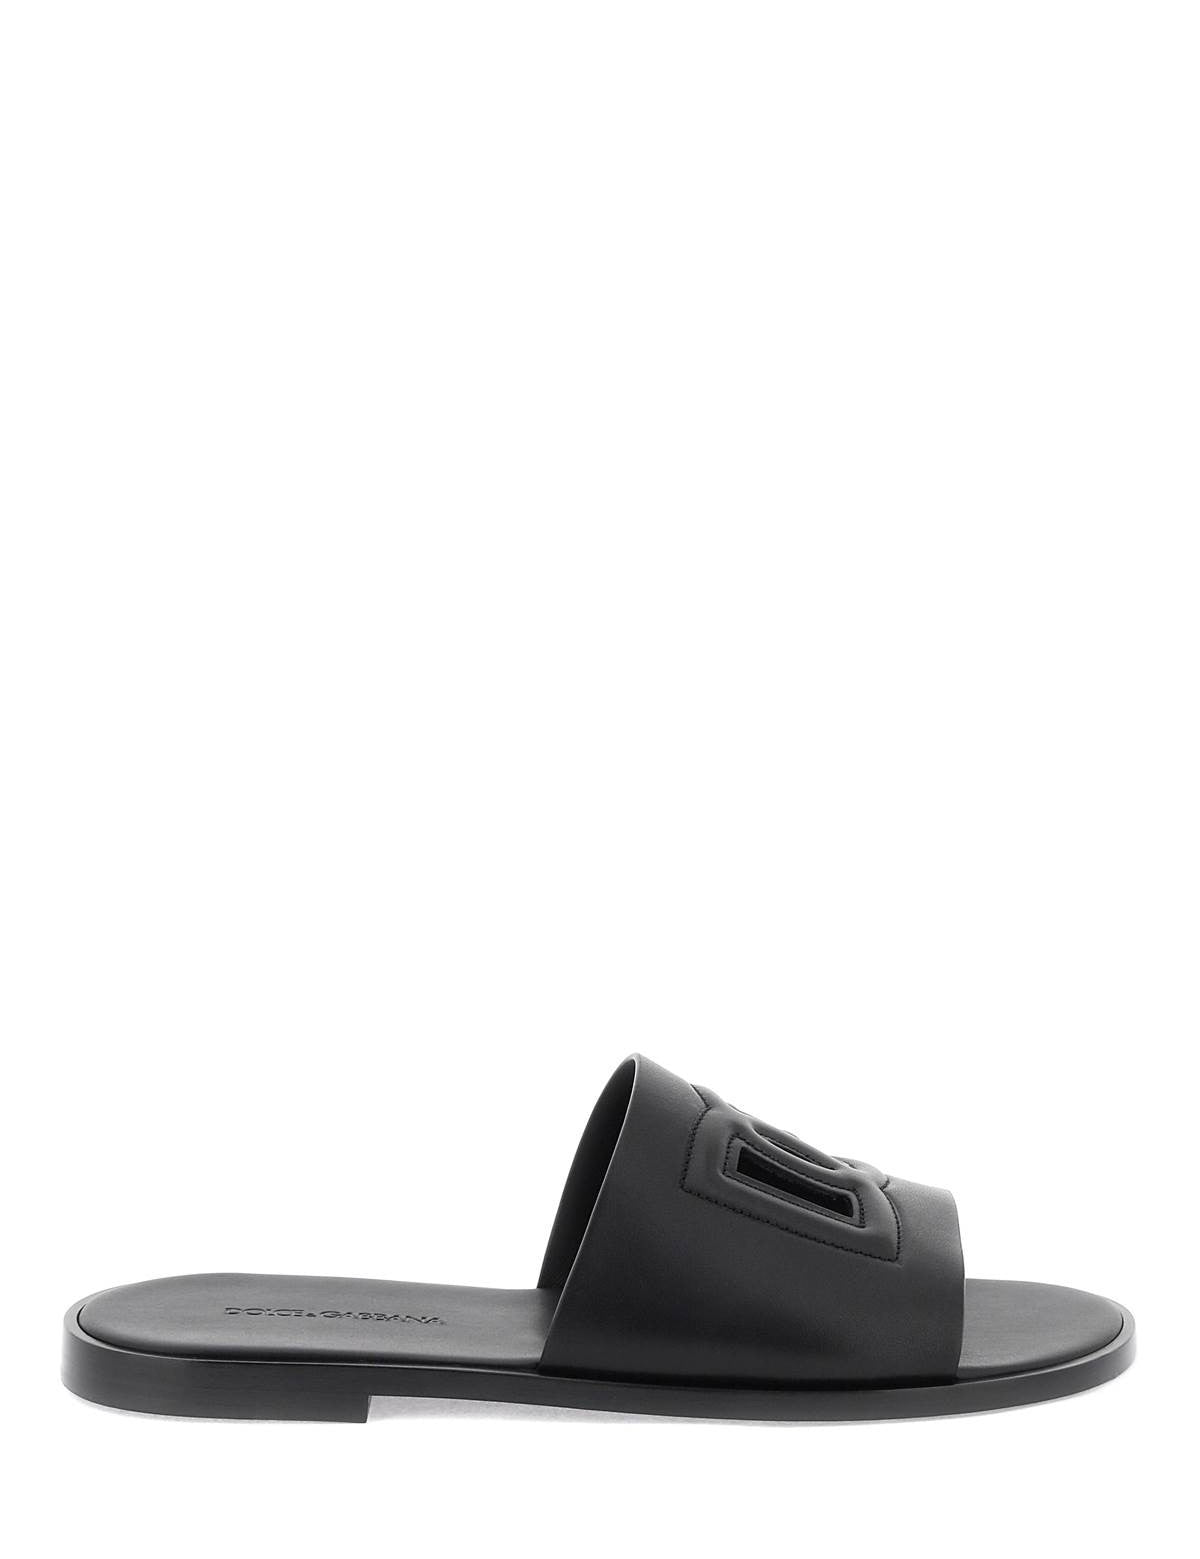 dolce-gabbana-leather-slides-with-dg-cut-out.jpg